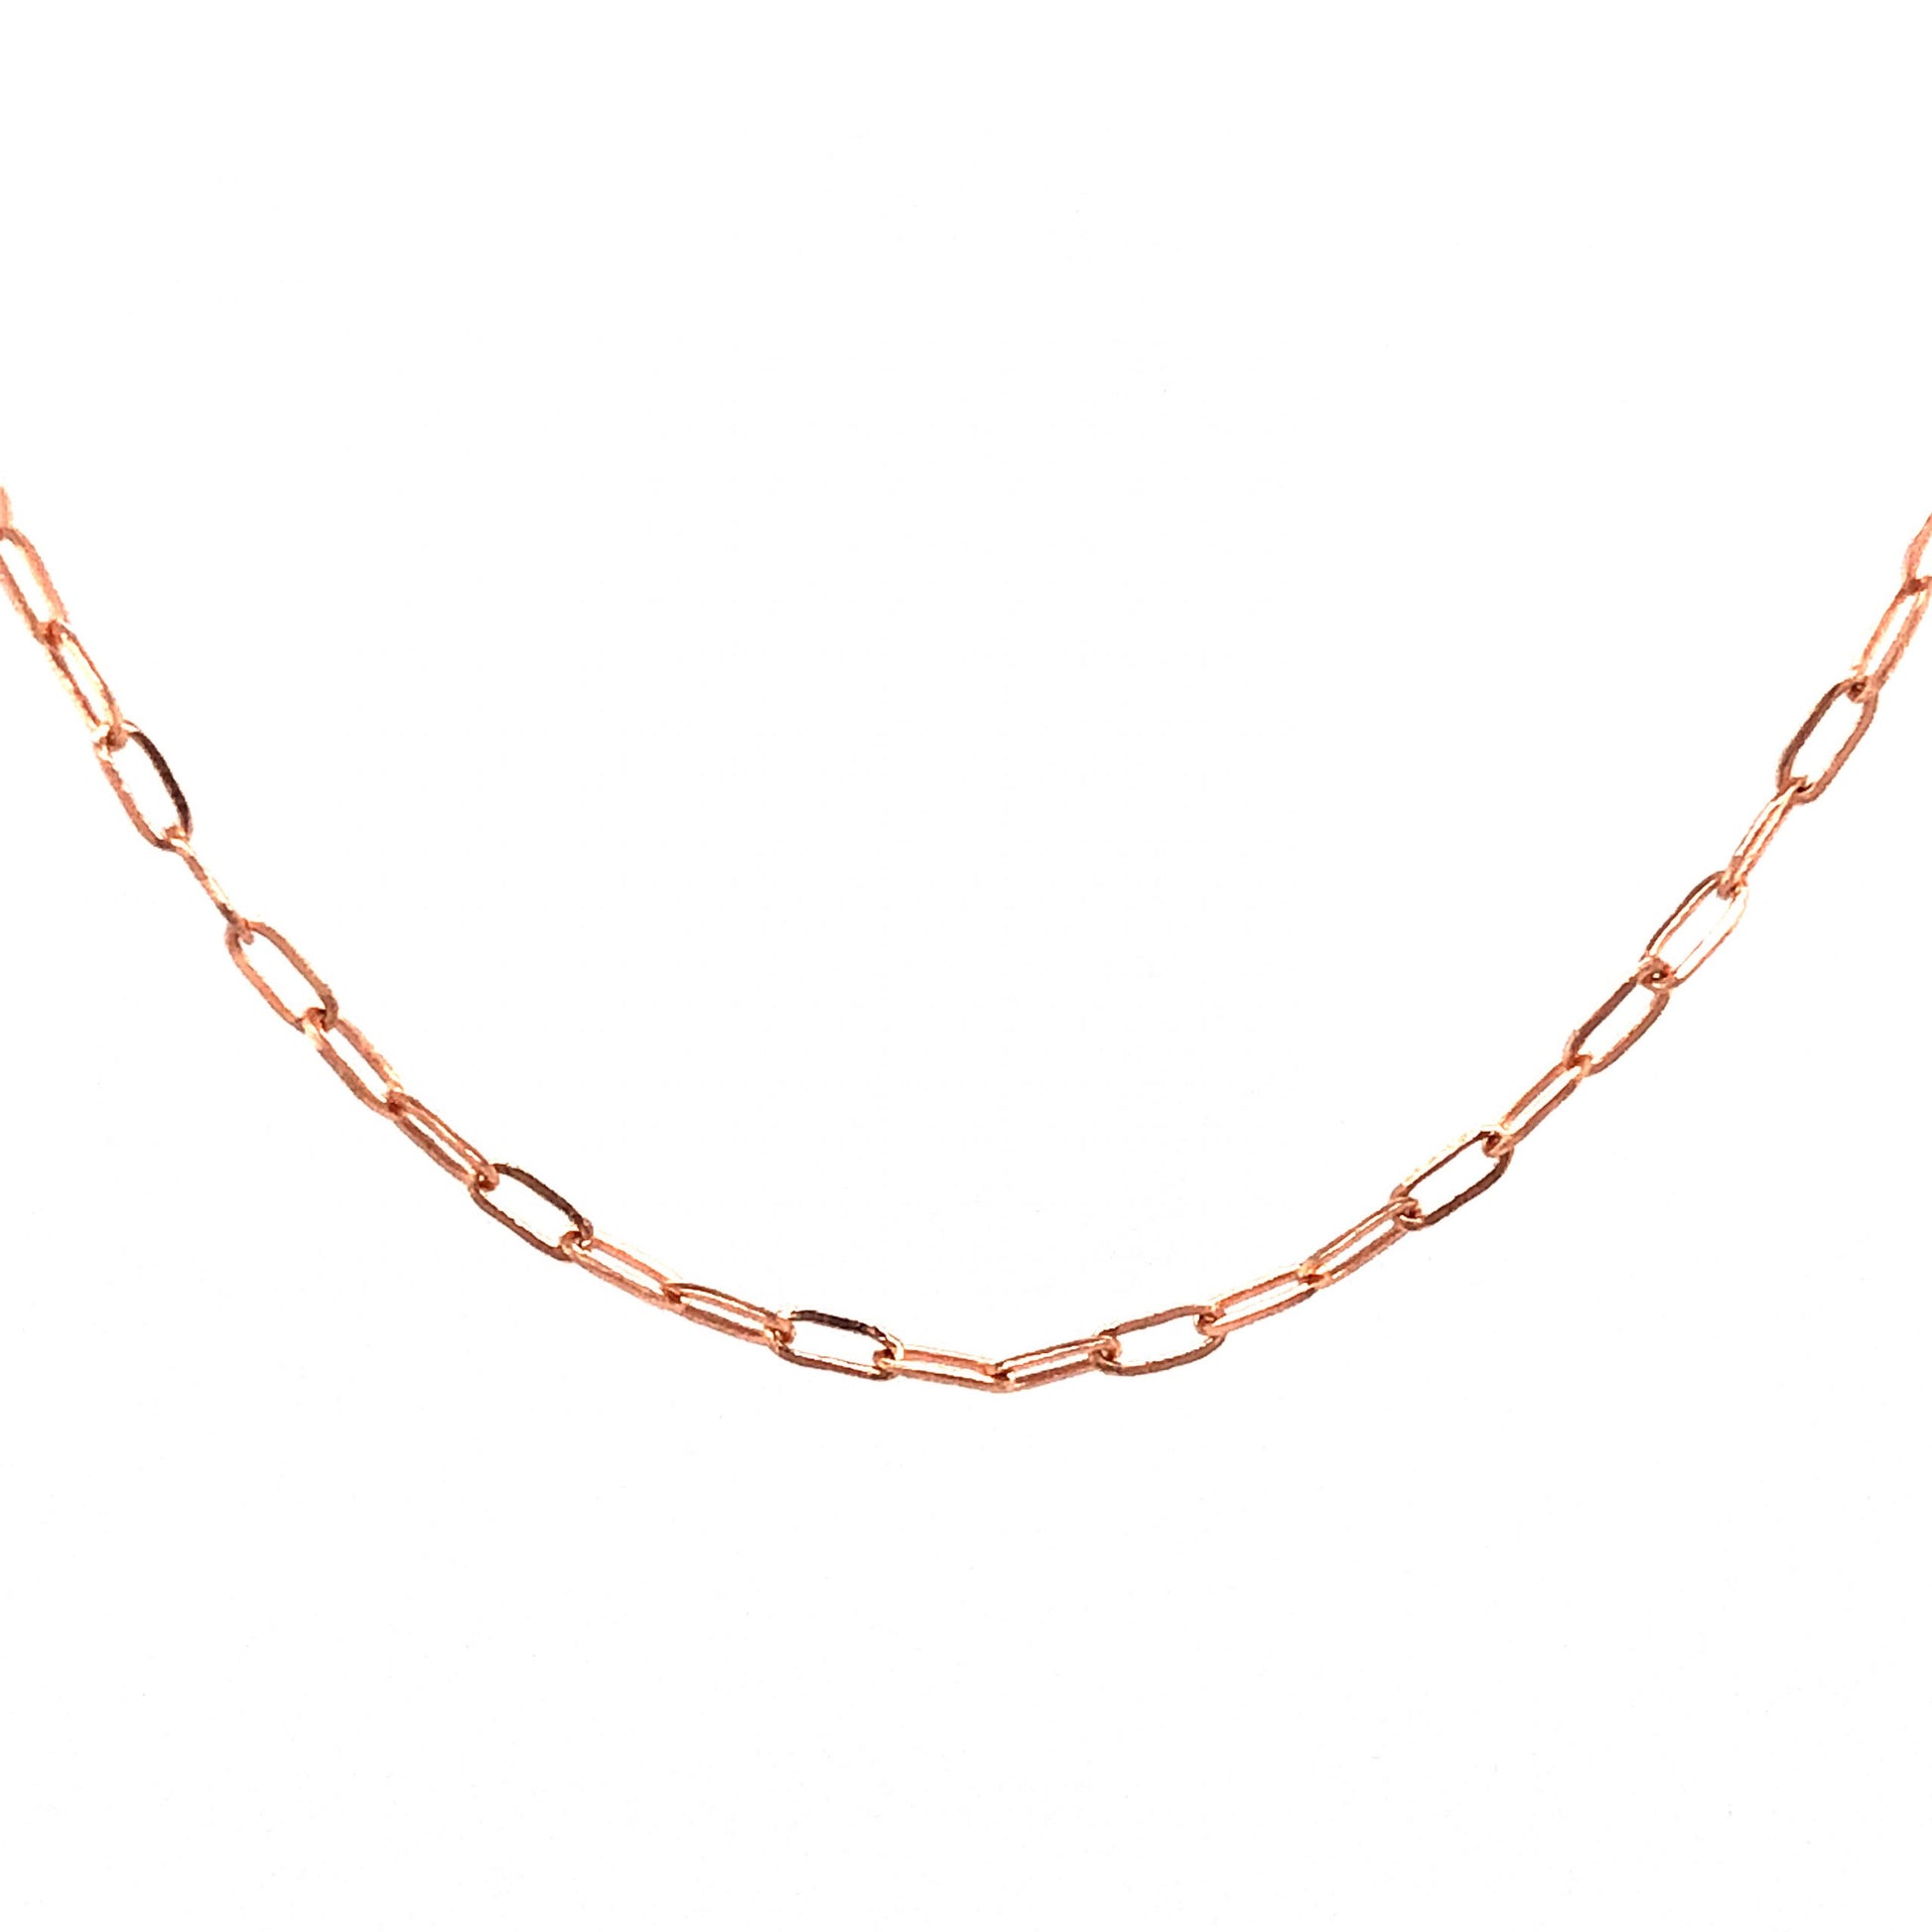 24 Inch Thin Paperclip Pendant Chain in 14k Rose Gold